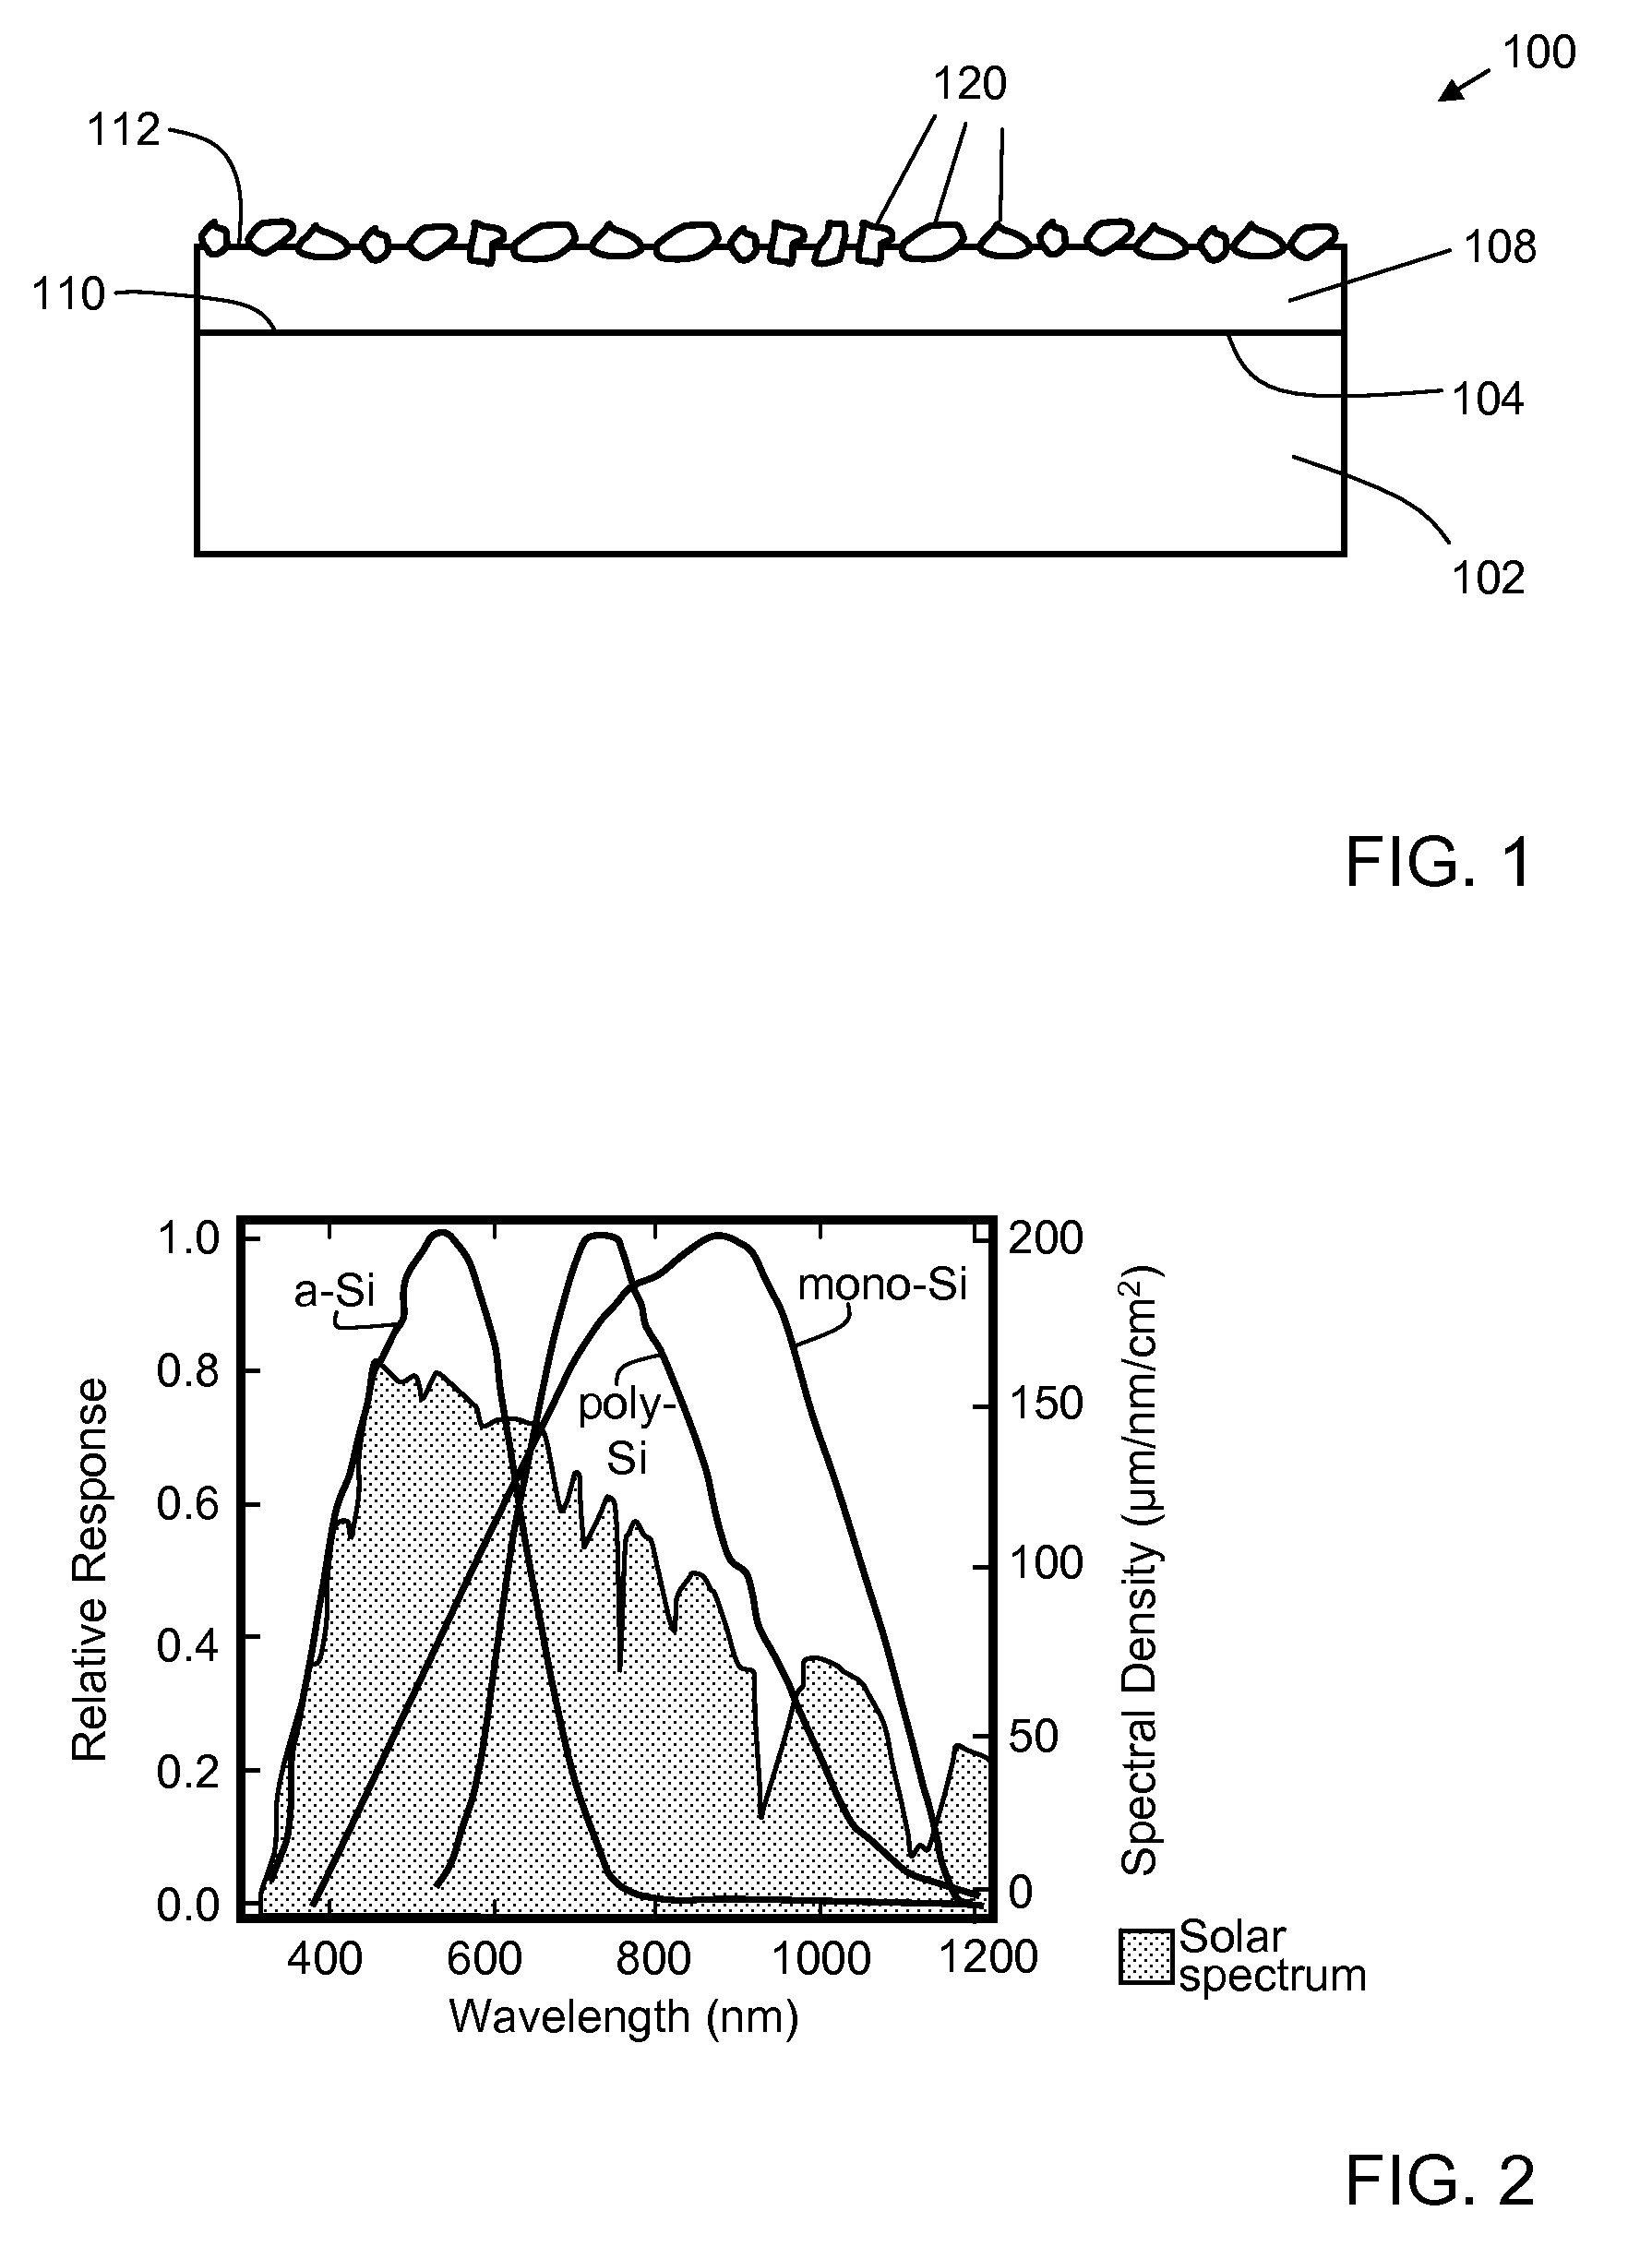 Photovoltaic Devices and Photovoltaic Roofing Elements Including Granules, and Roofs Using Them